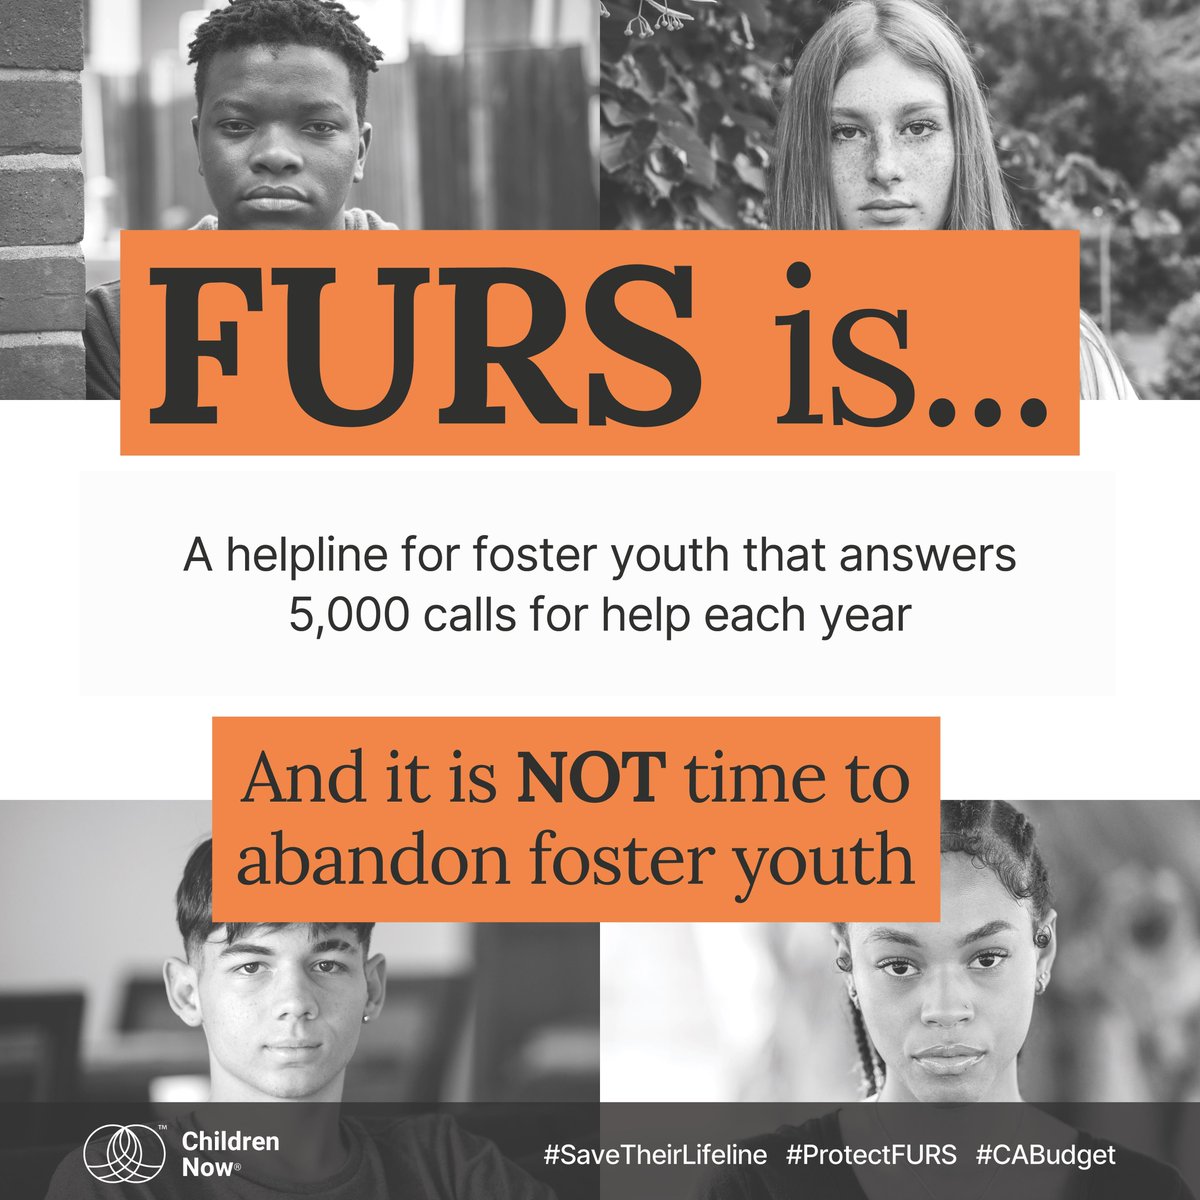 Foster youth need your help. Please join over 5,400 organizations in The Children's Movement of California and sign on to our campaign to save FURS: bit.ly/48lMAo2